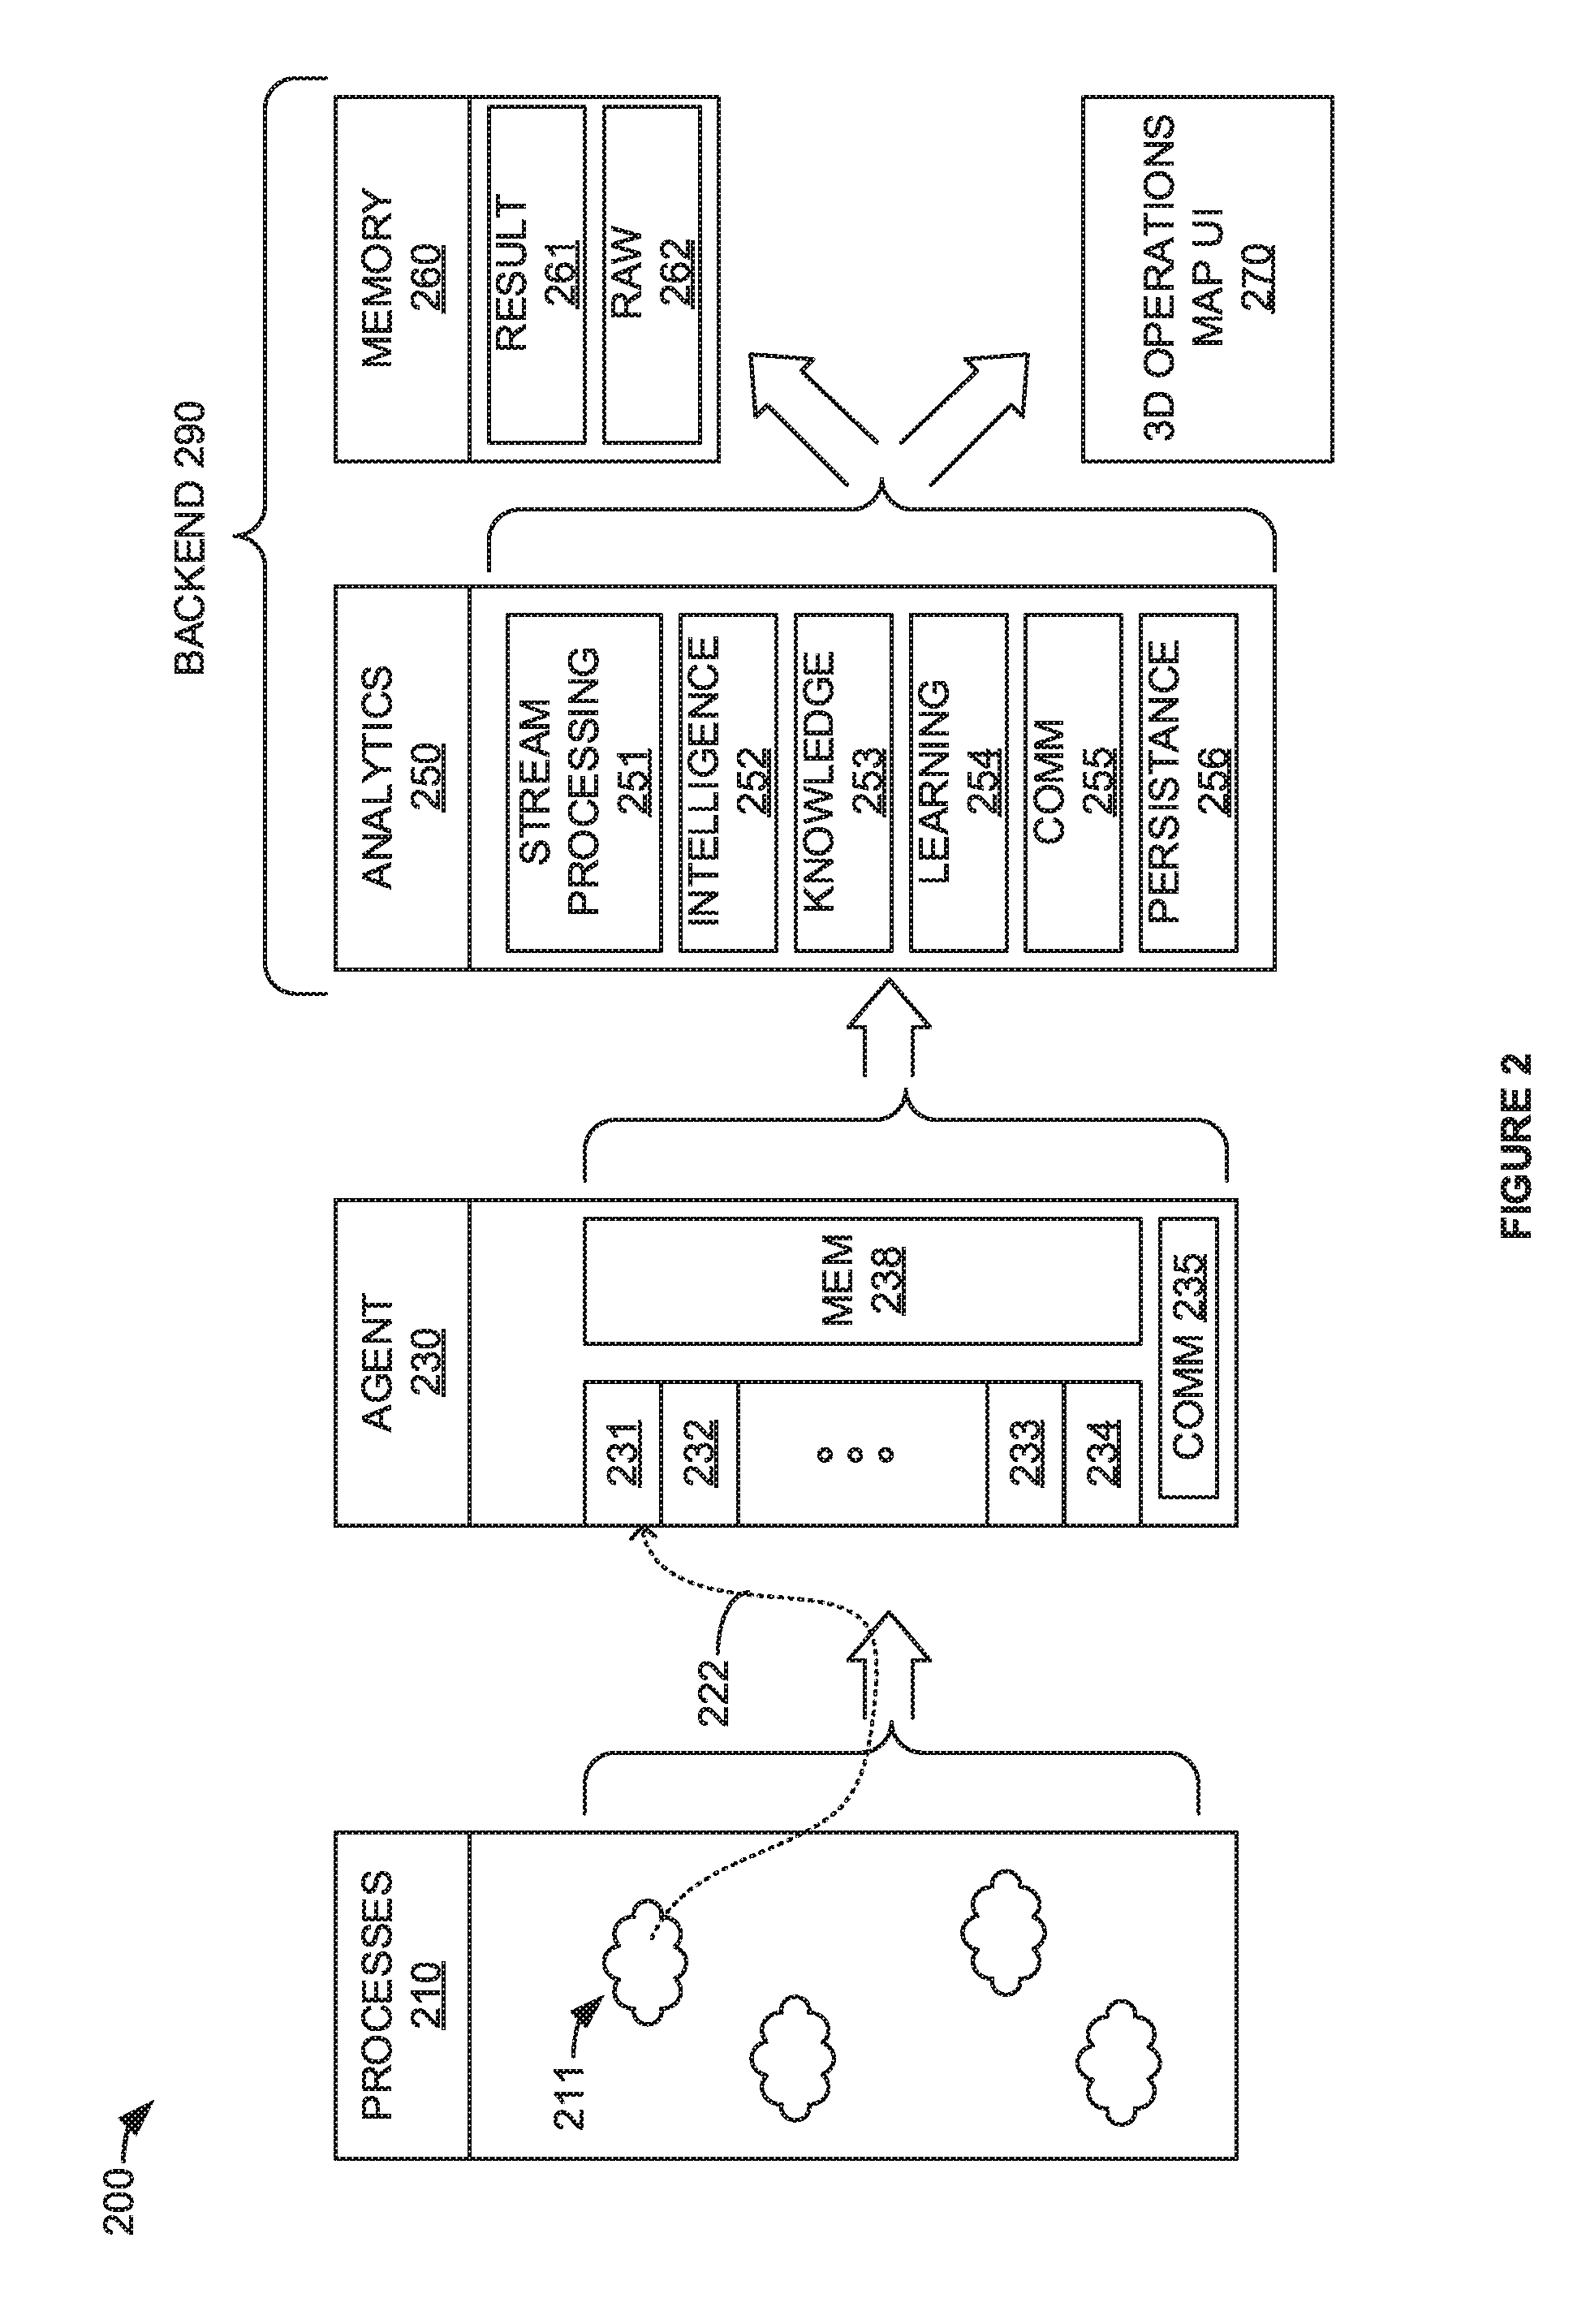 User interface for an application performance management system